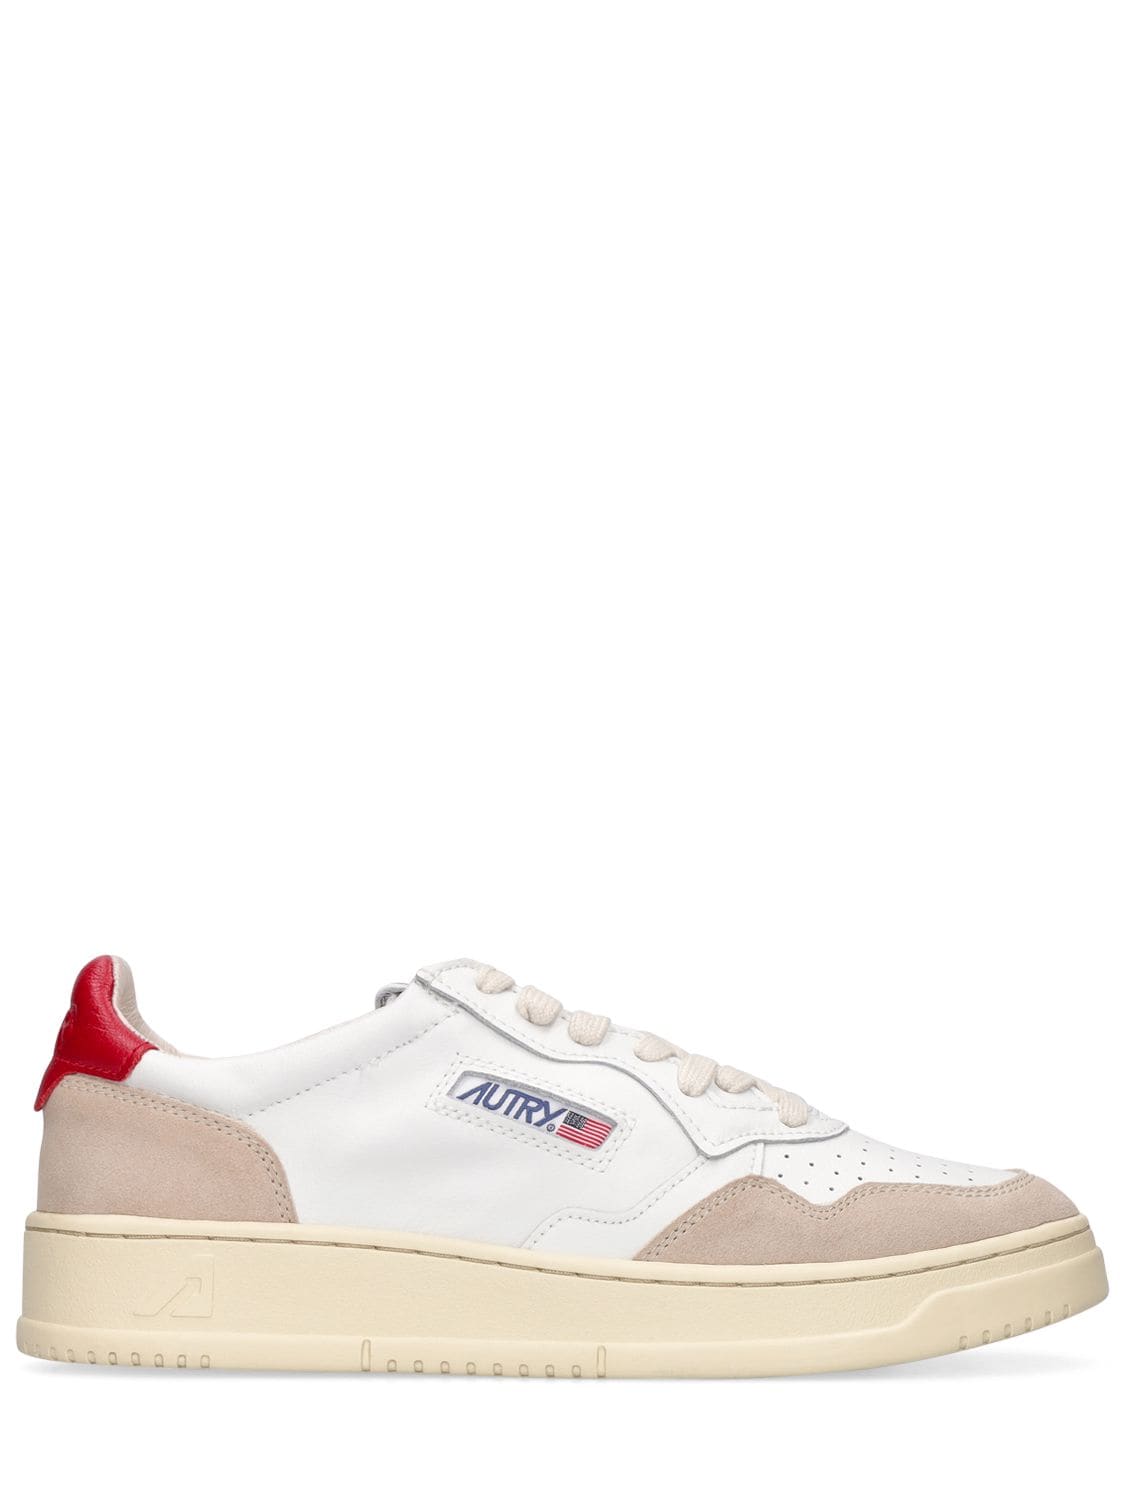 Autry - Medalist leather low sneakers - White | Luisaviaroma